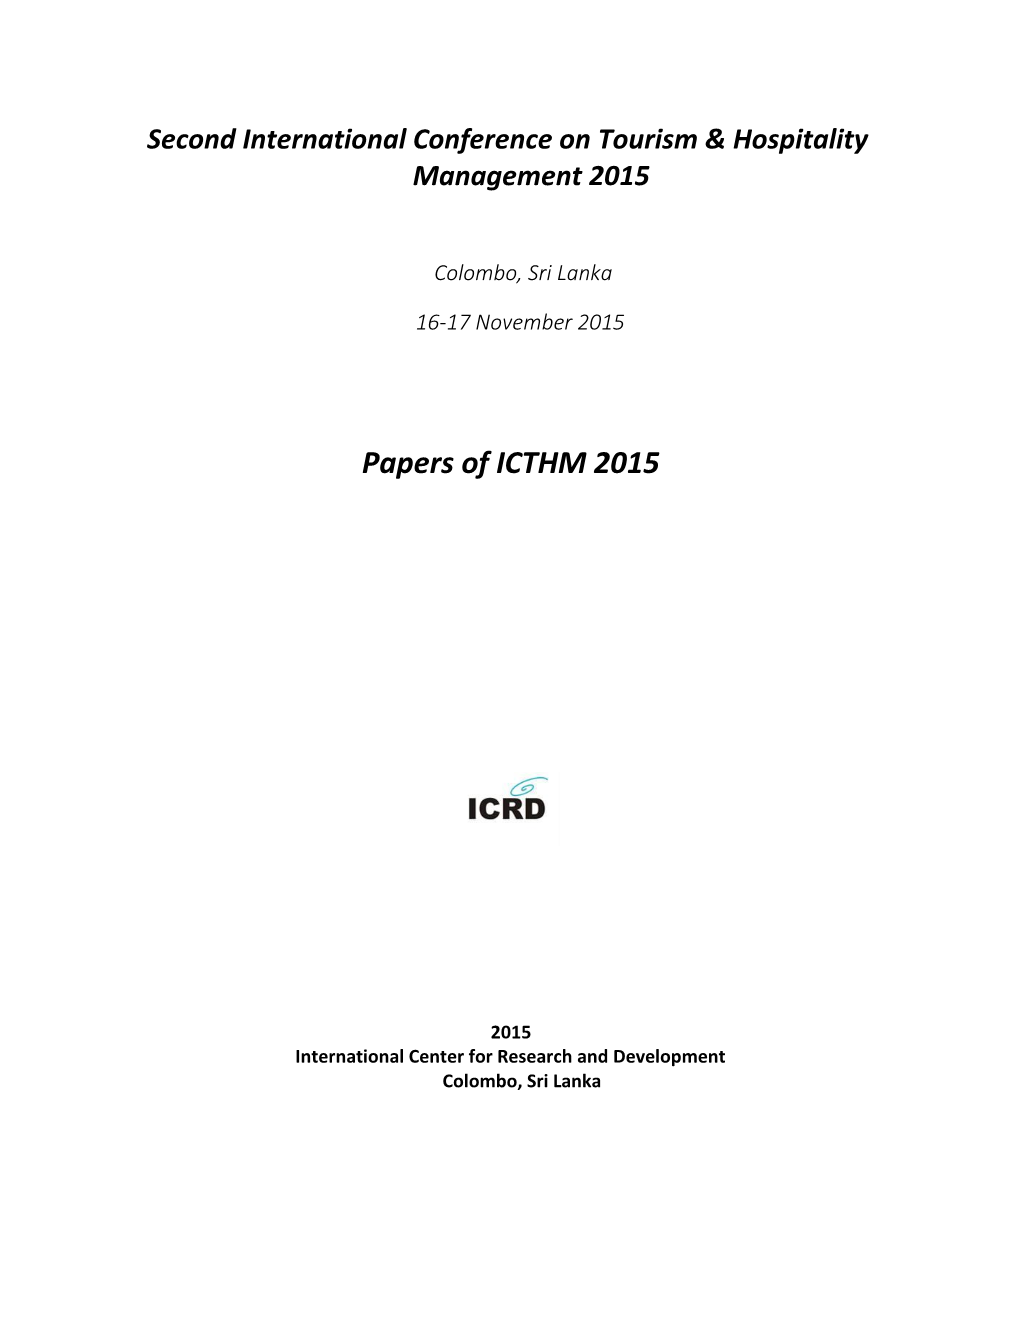 Papers of ICTHM 2015